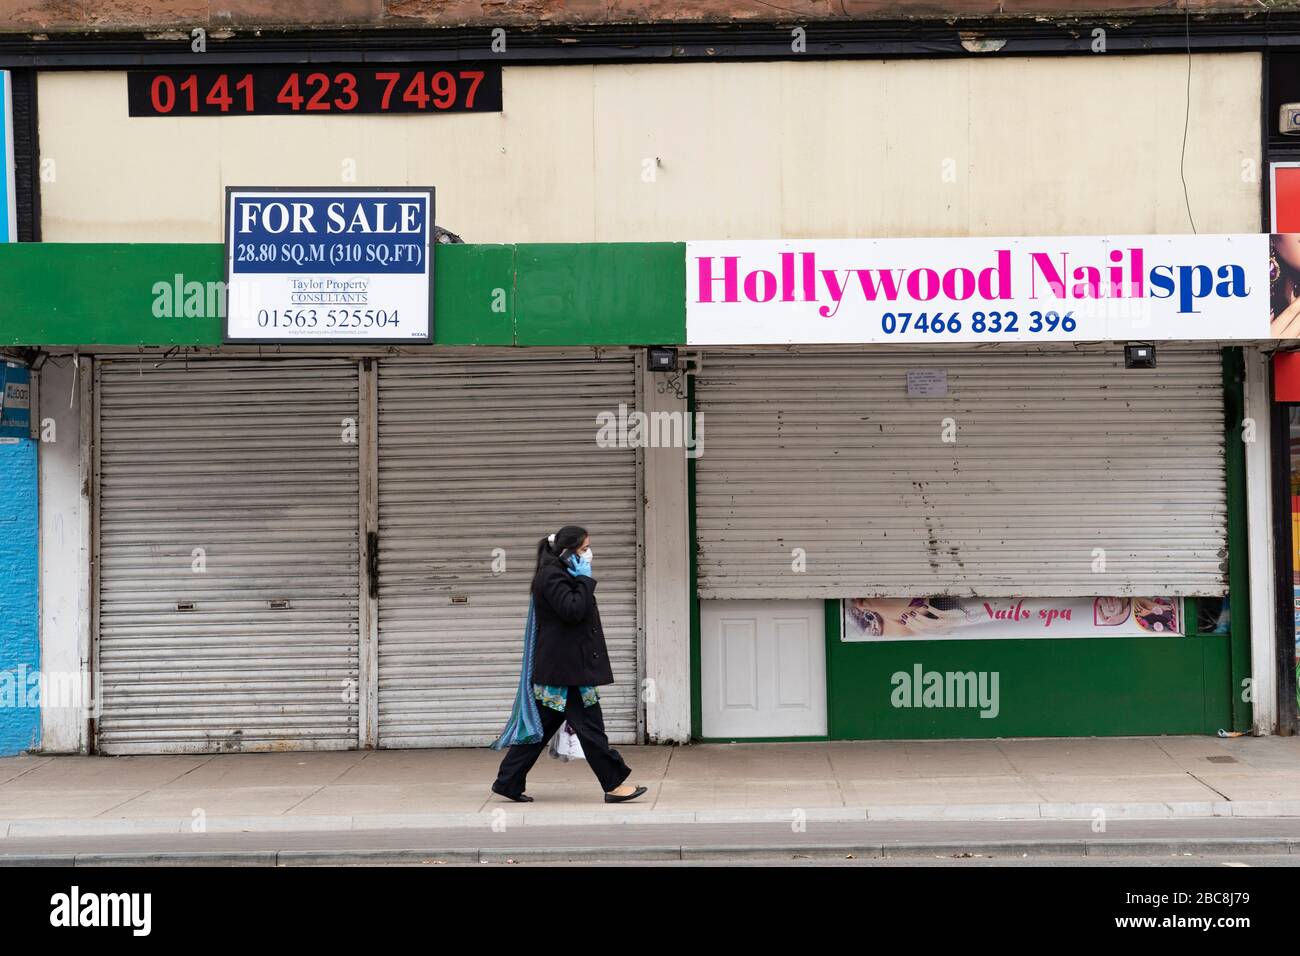 Glasgow, Scotland, UK. 3 April, 2020. Images from the south side of Glasgow at the end of the second week of Coronavirus lockdown. Many closed and shuttered shops off Victoria Road in Govanhill.  Iain Masterton/Alamy Live News Stock Photo